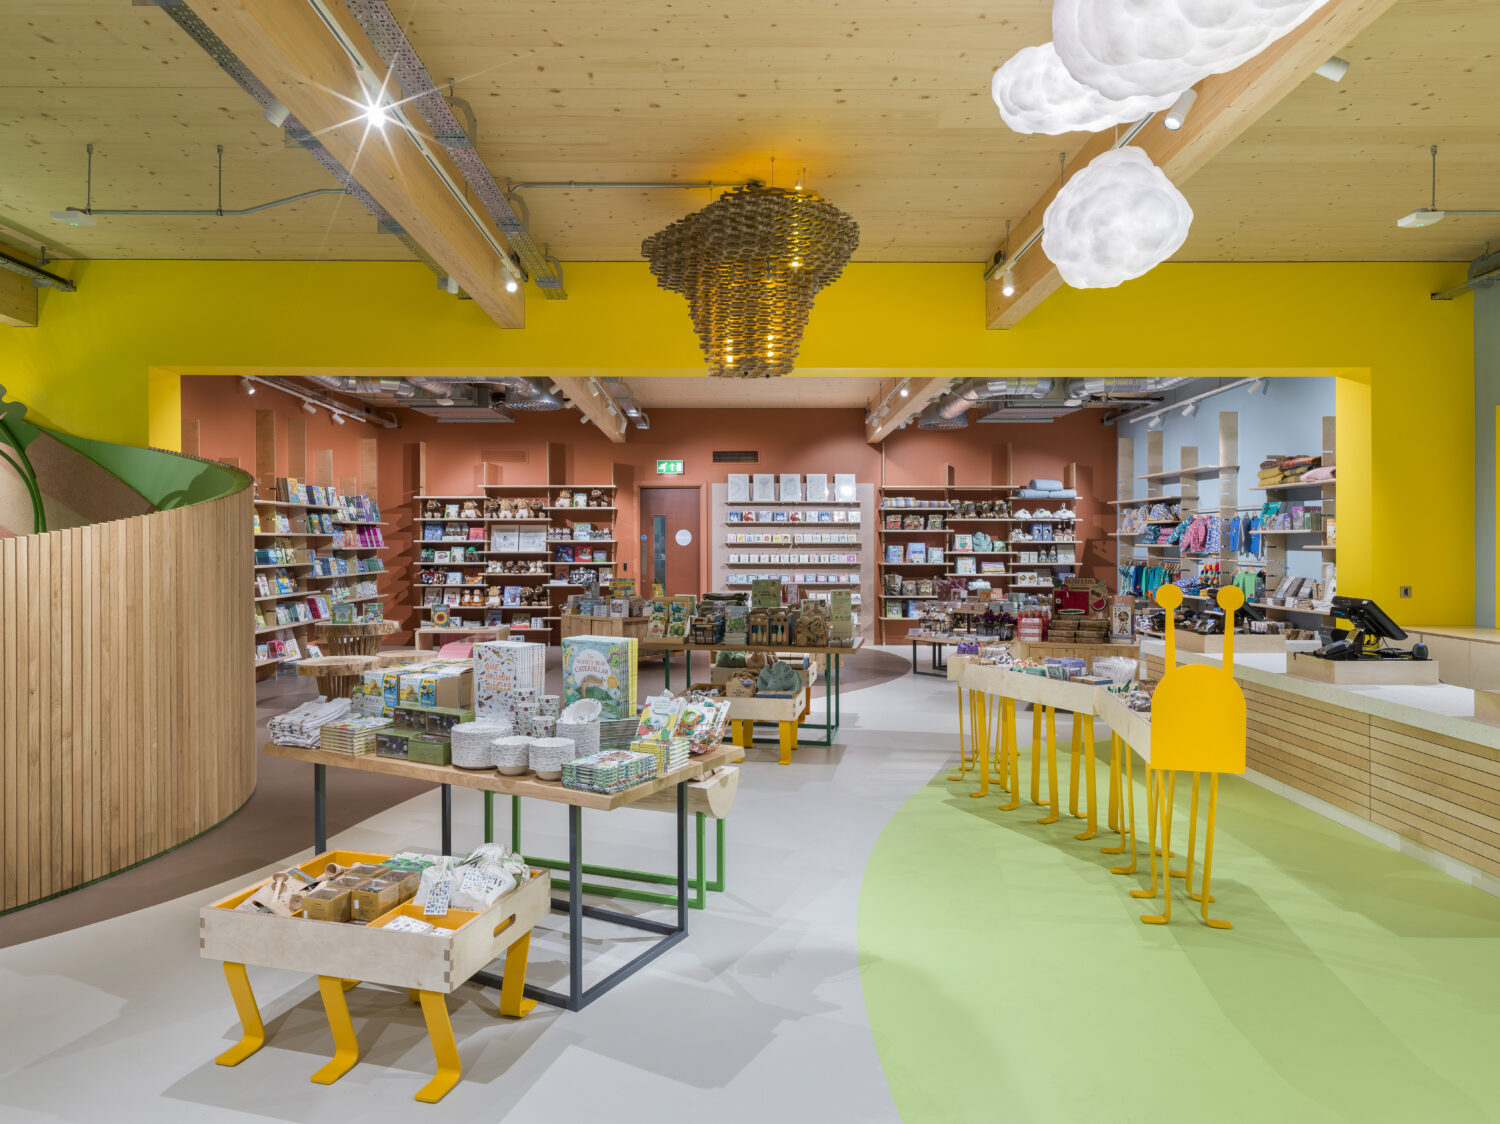 Kew Gardens Family Kitchen & Shop by Andrew Meredith